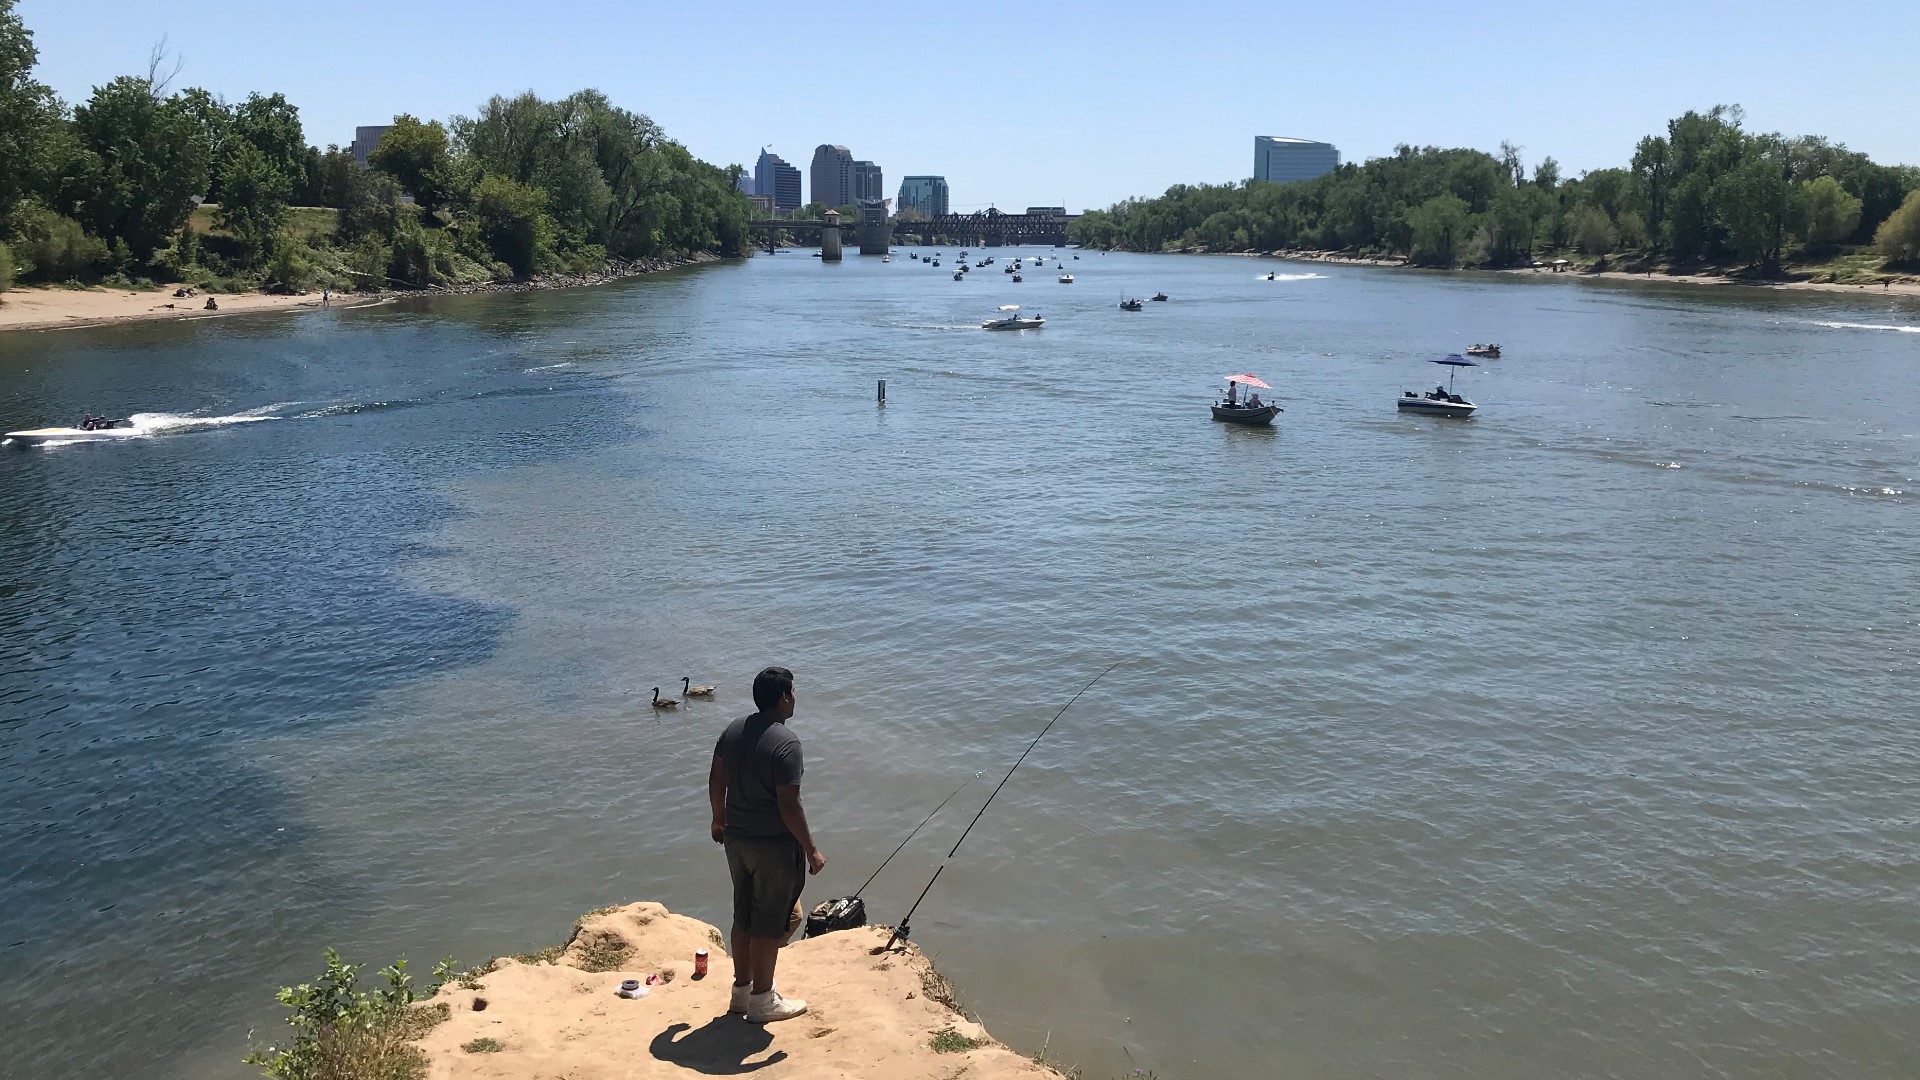 As temperatures rose outside over the weekend so did the number of people flocking to parks and rivers. People were boating, swimming, or just catching the sun.